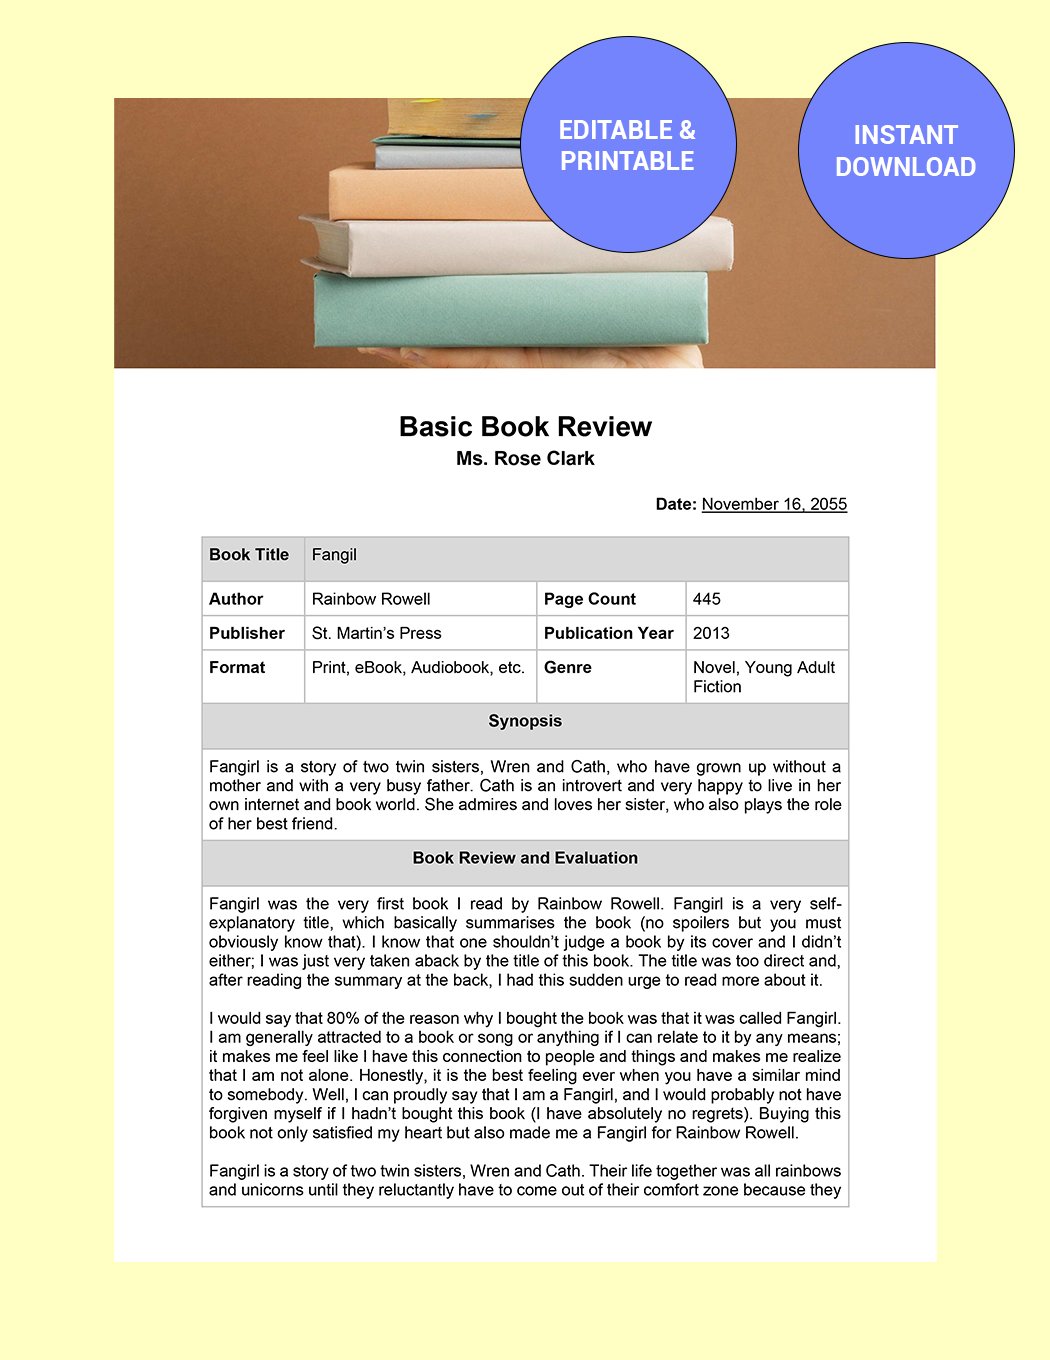 Basic Book Review Template